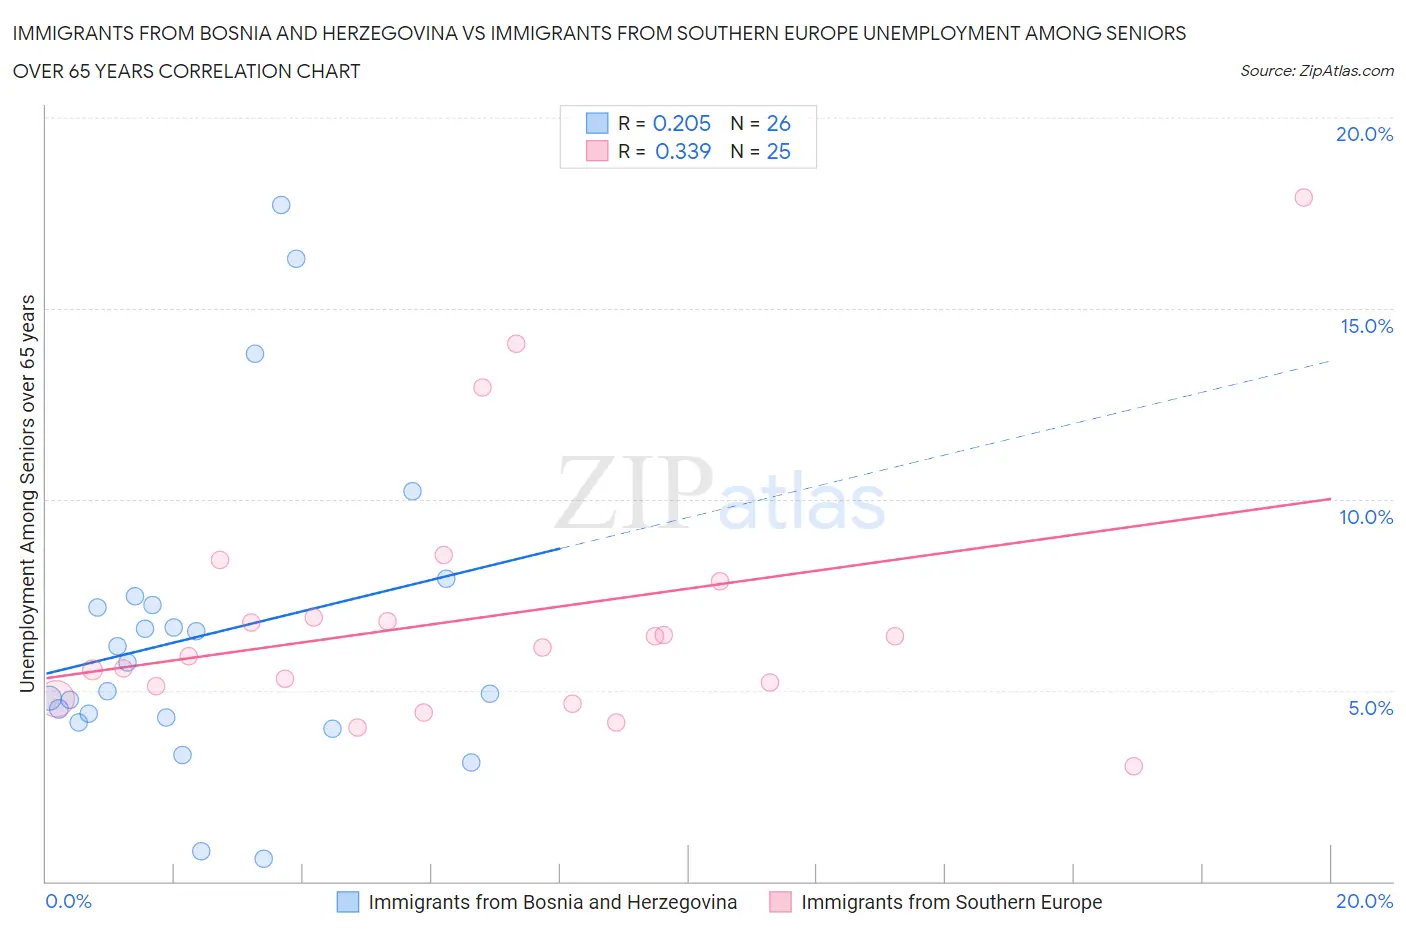 Immigrants from Bosnia and Herzegovina vs Immigrants from Southern Europe Unemployment Among Seniors over 65 years